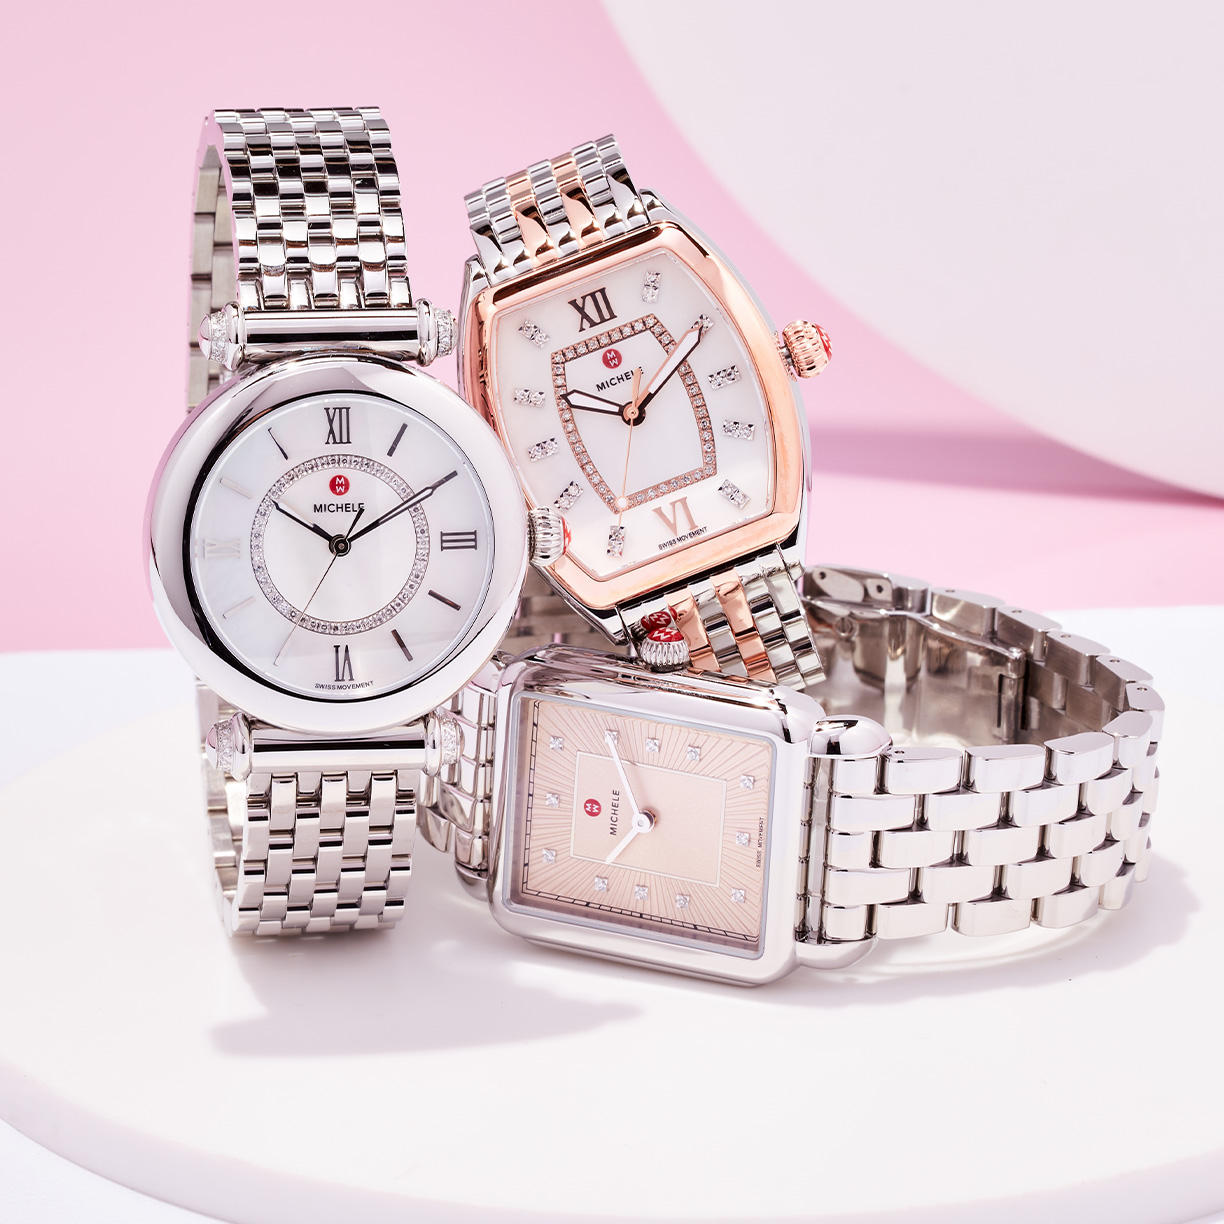 Luxe Watches for Her from MICHELE & More